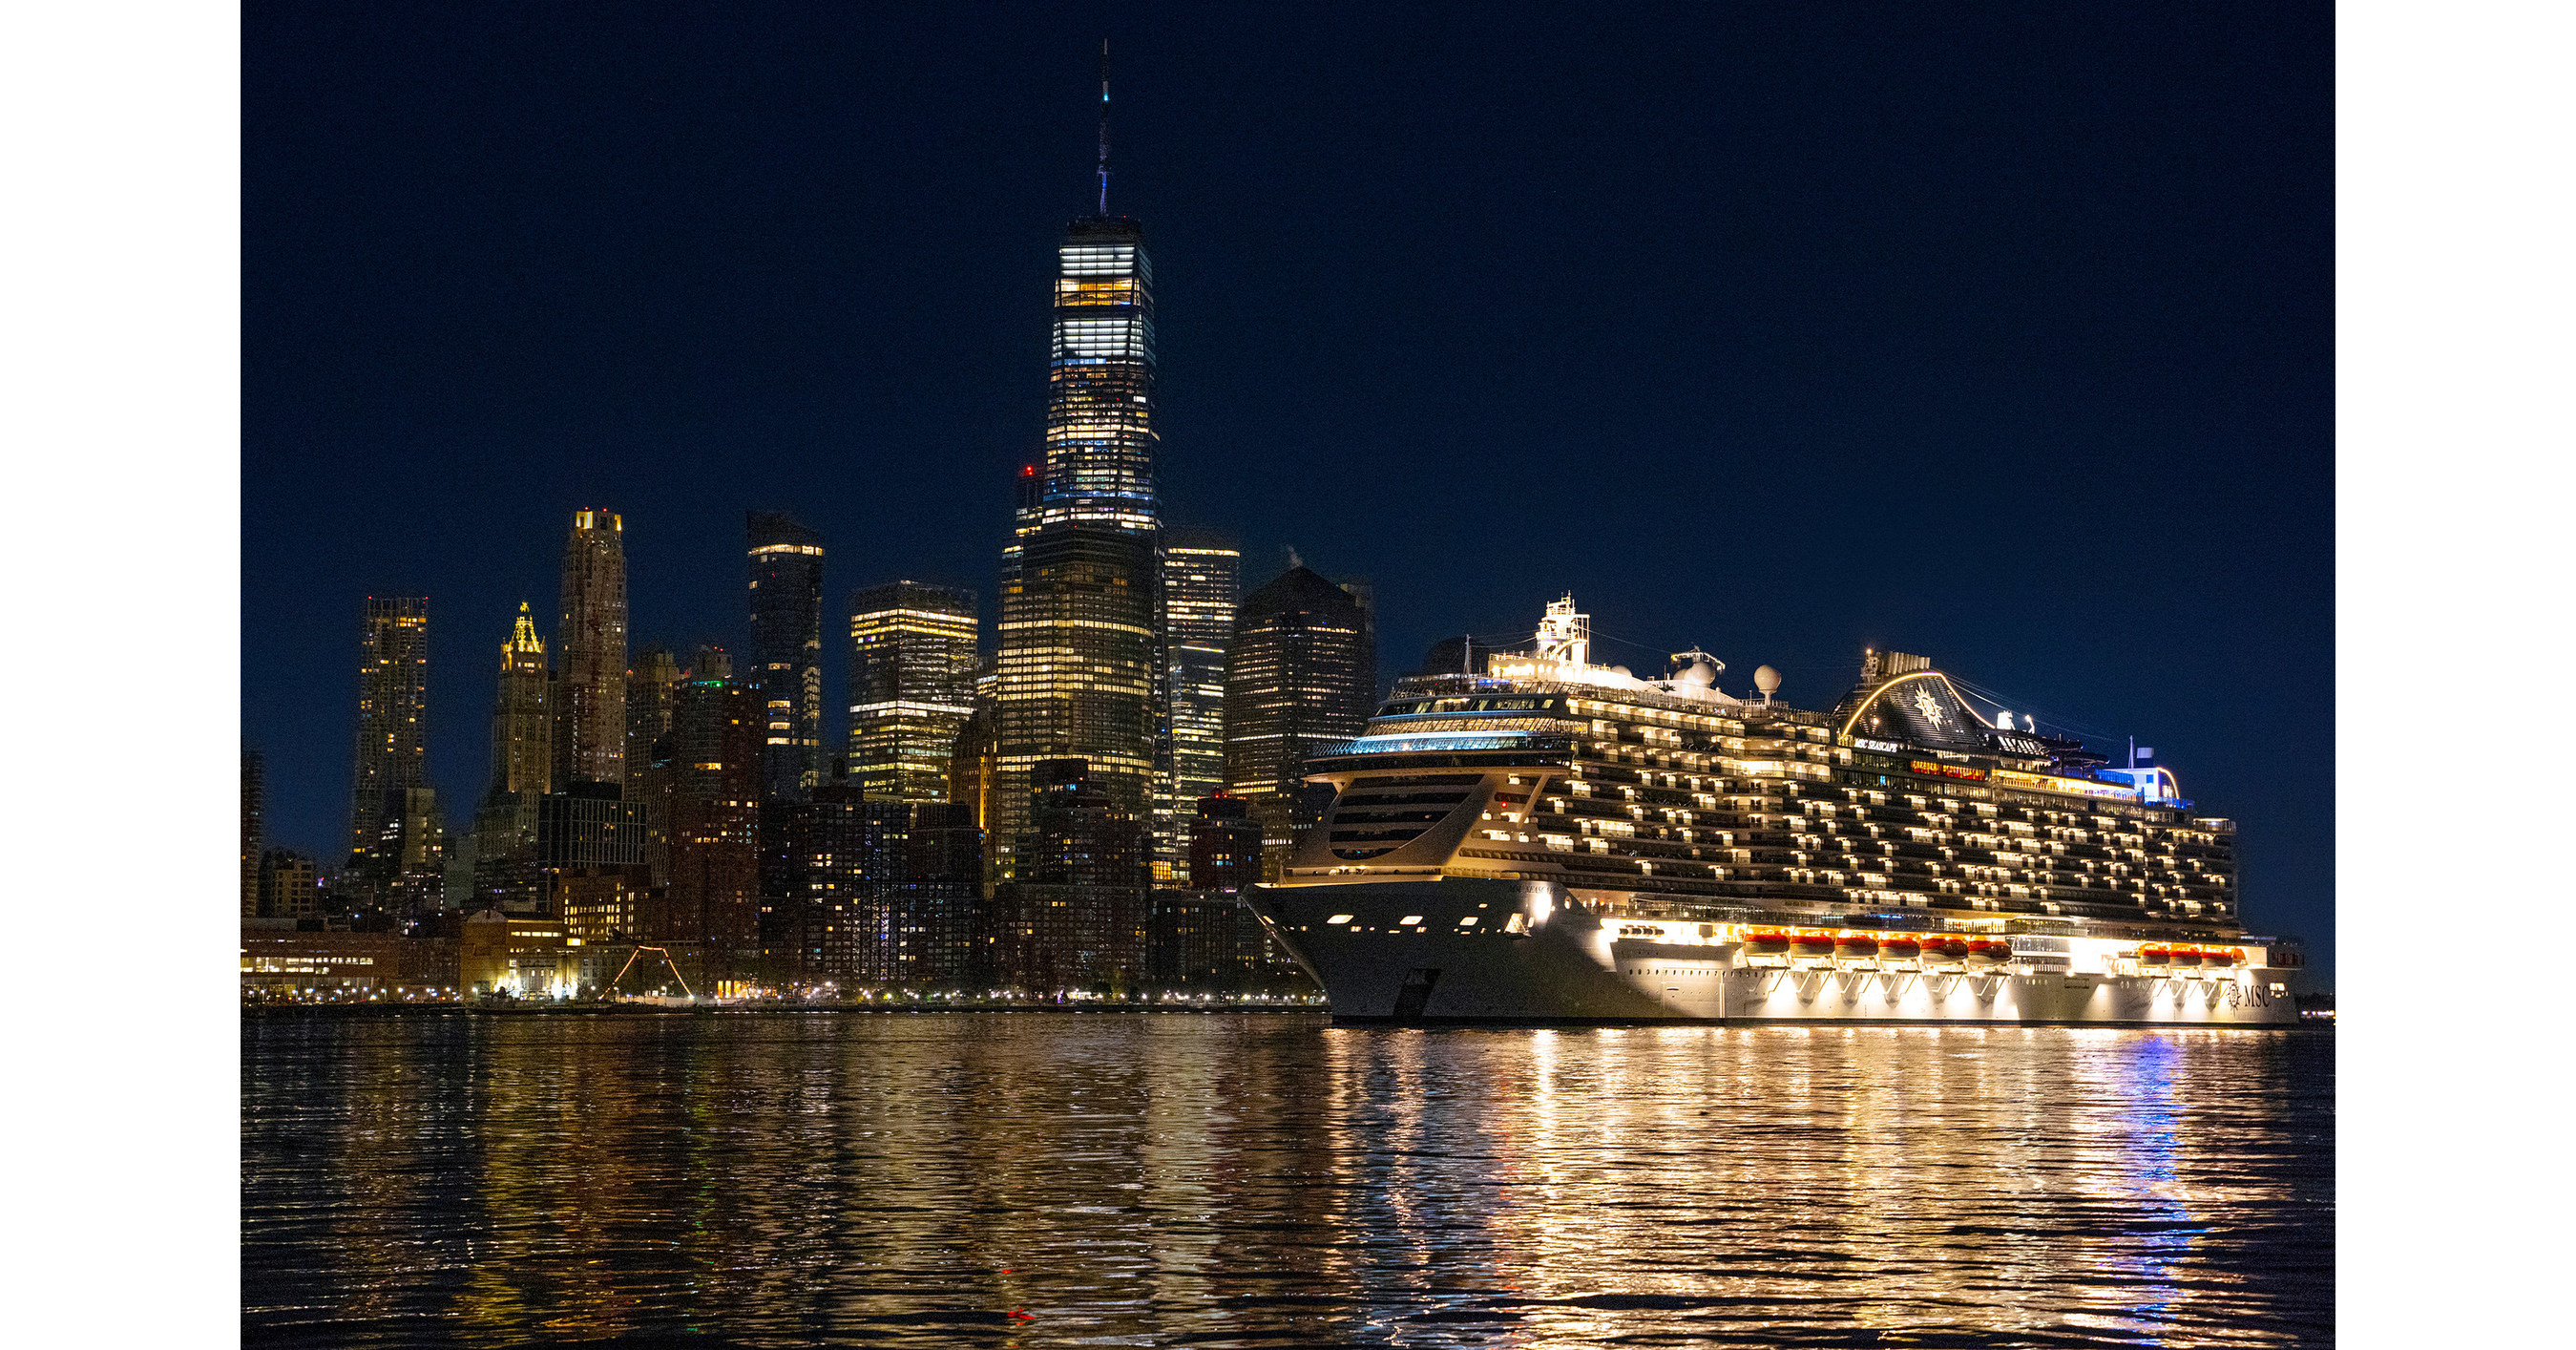 msc cruise from new york